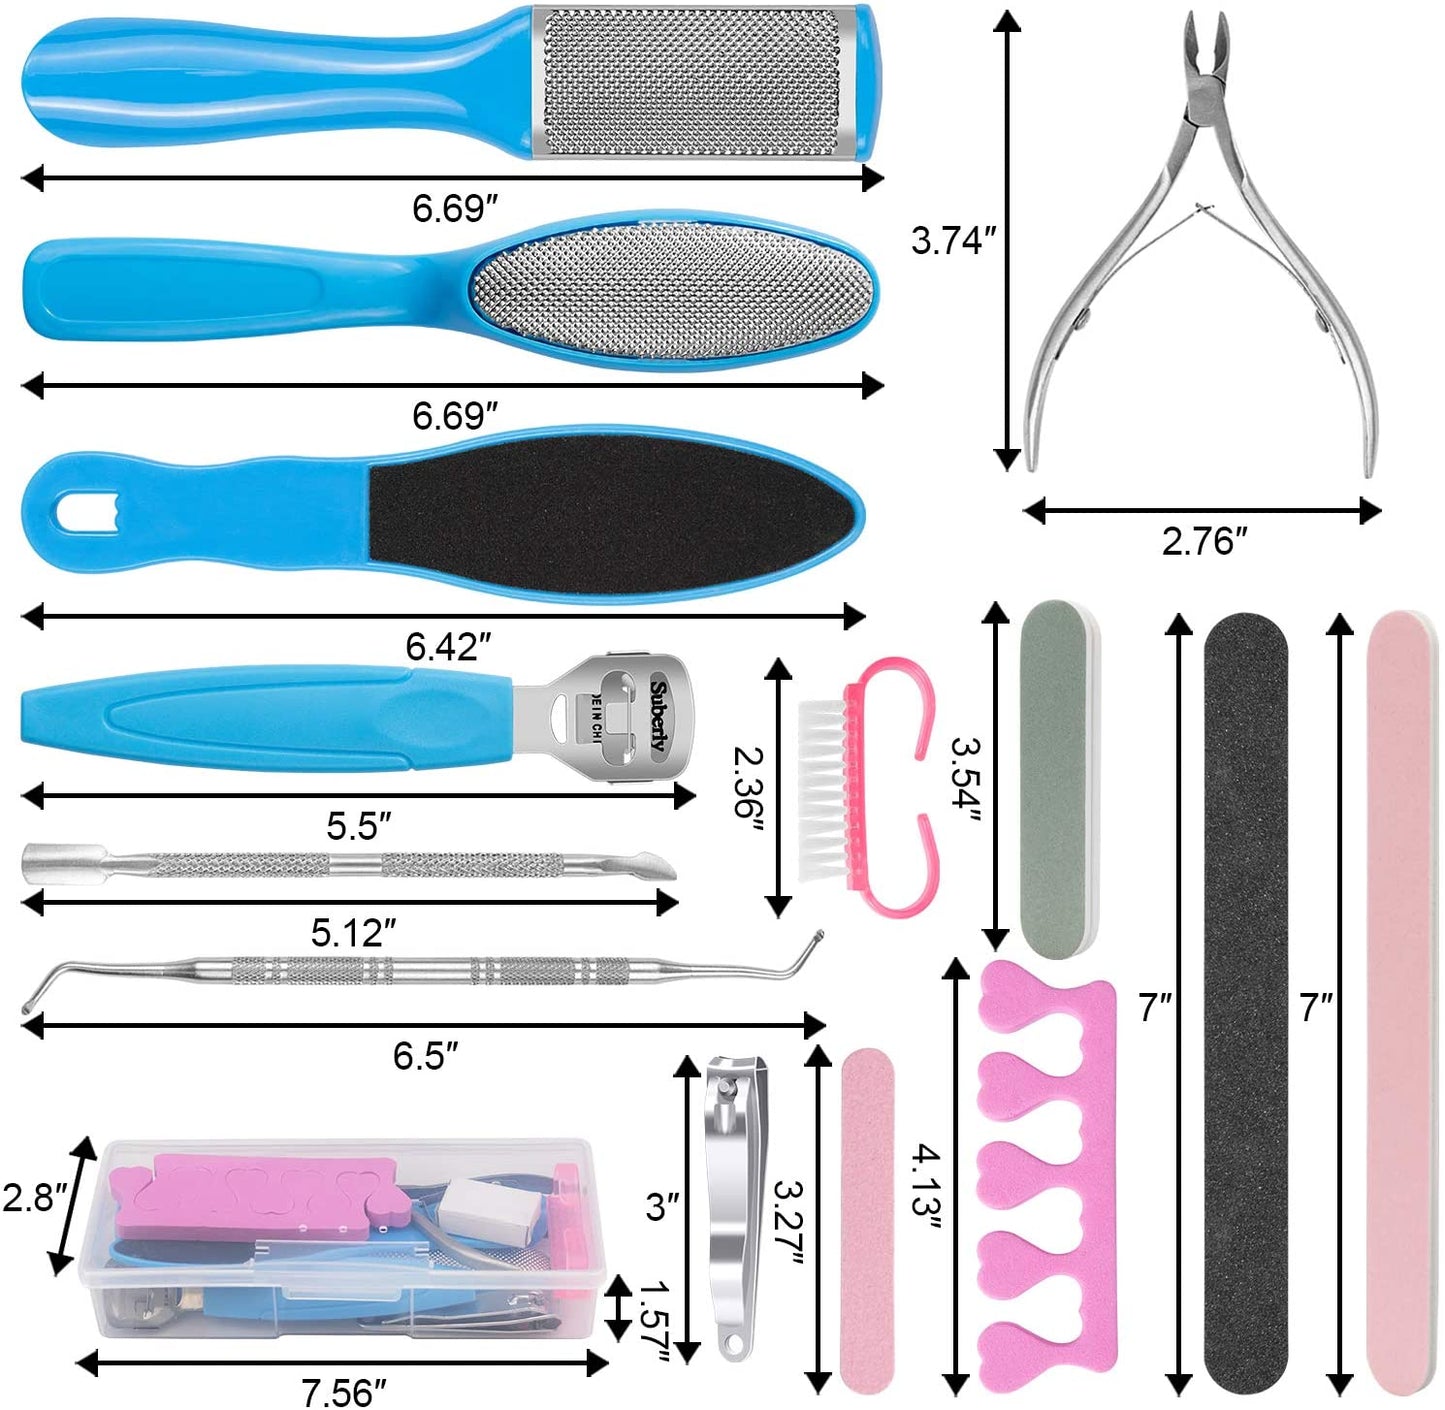 MFW Pedicure Kit 20 in 1, Professional Pedicure Tools Set Stainless Steel Foot Files Callus Remover Foot Rasp Scrubber Dead Skin Remover Pedicure Spa Kits for Women Men Foot Care at Home and Salon